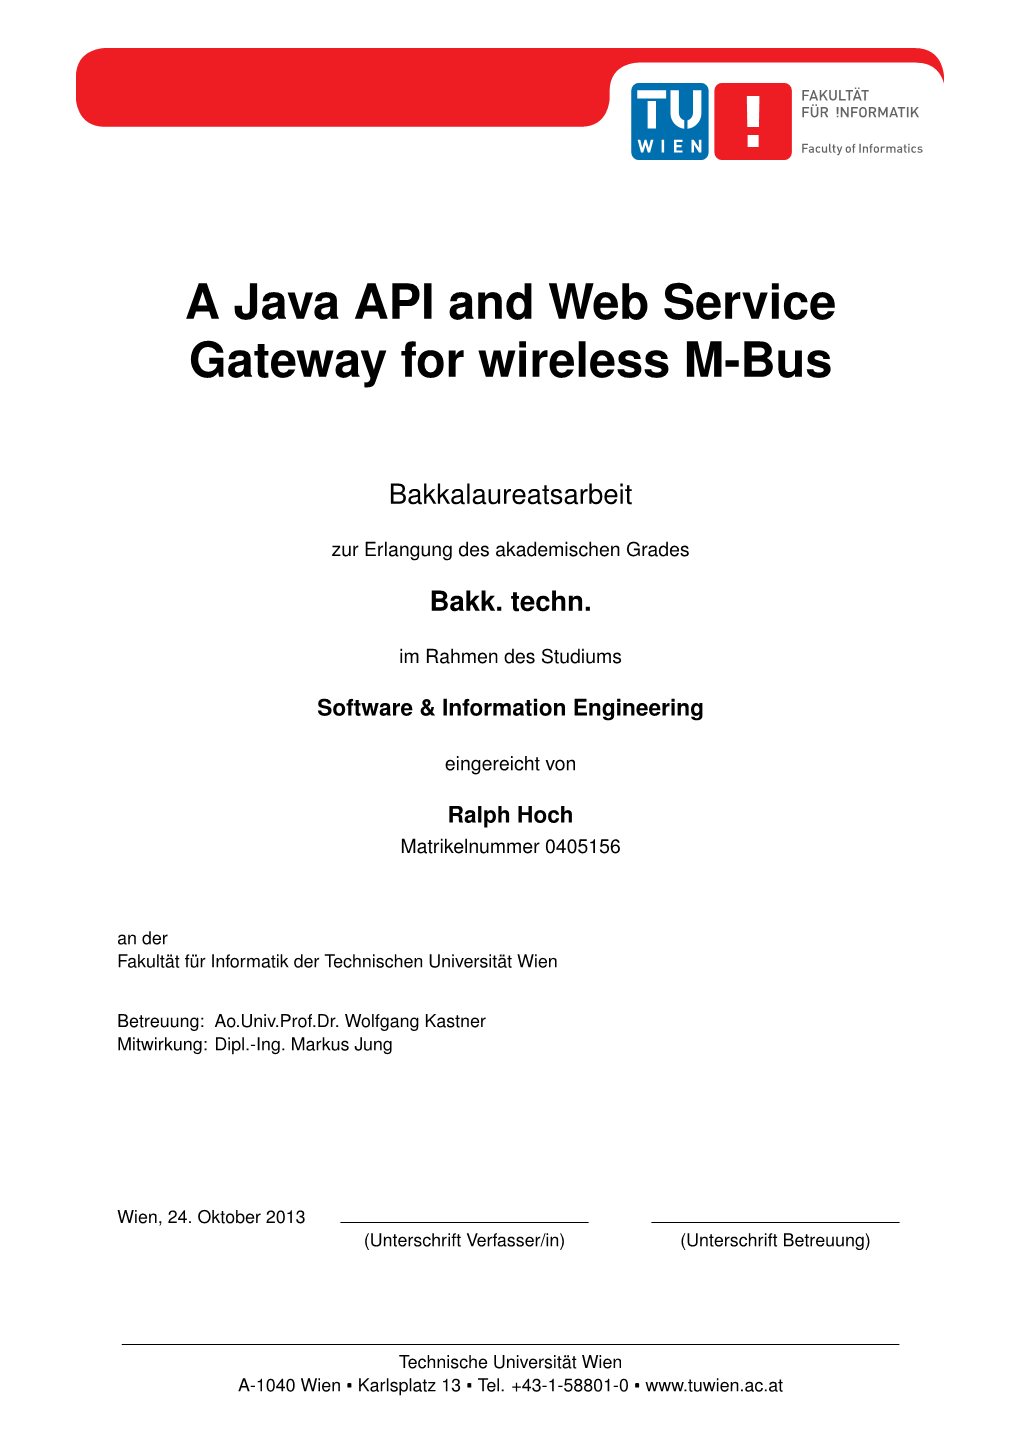 A Java API and Web Service Gateway for Wireless M-Bus